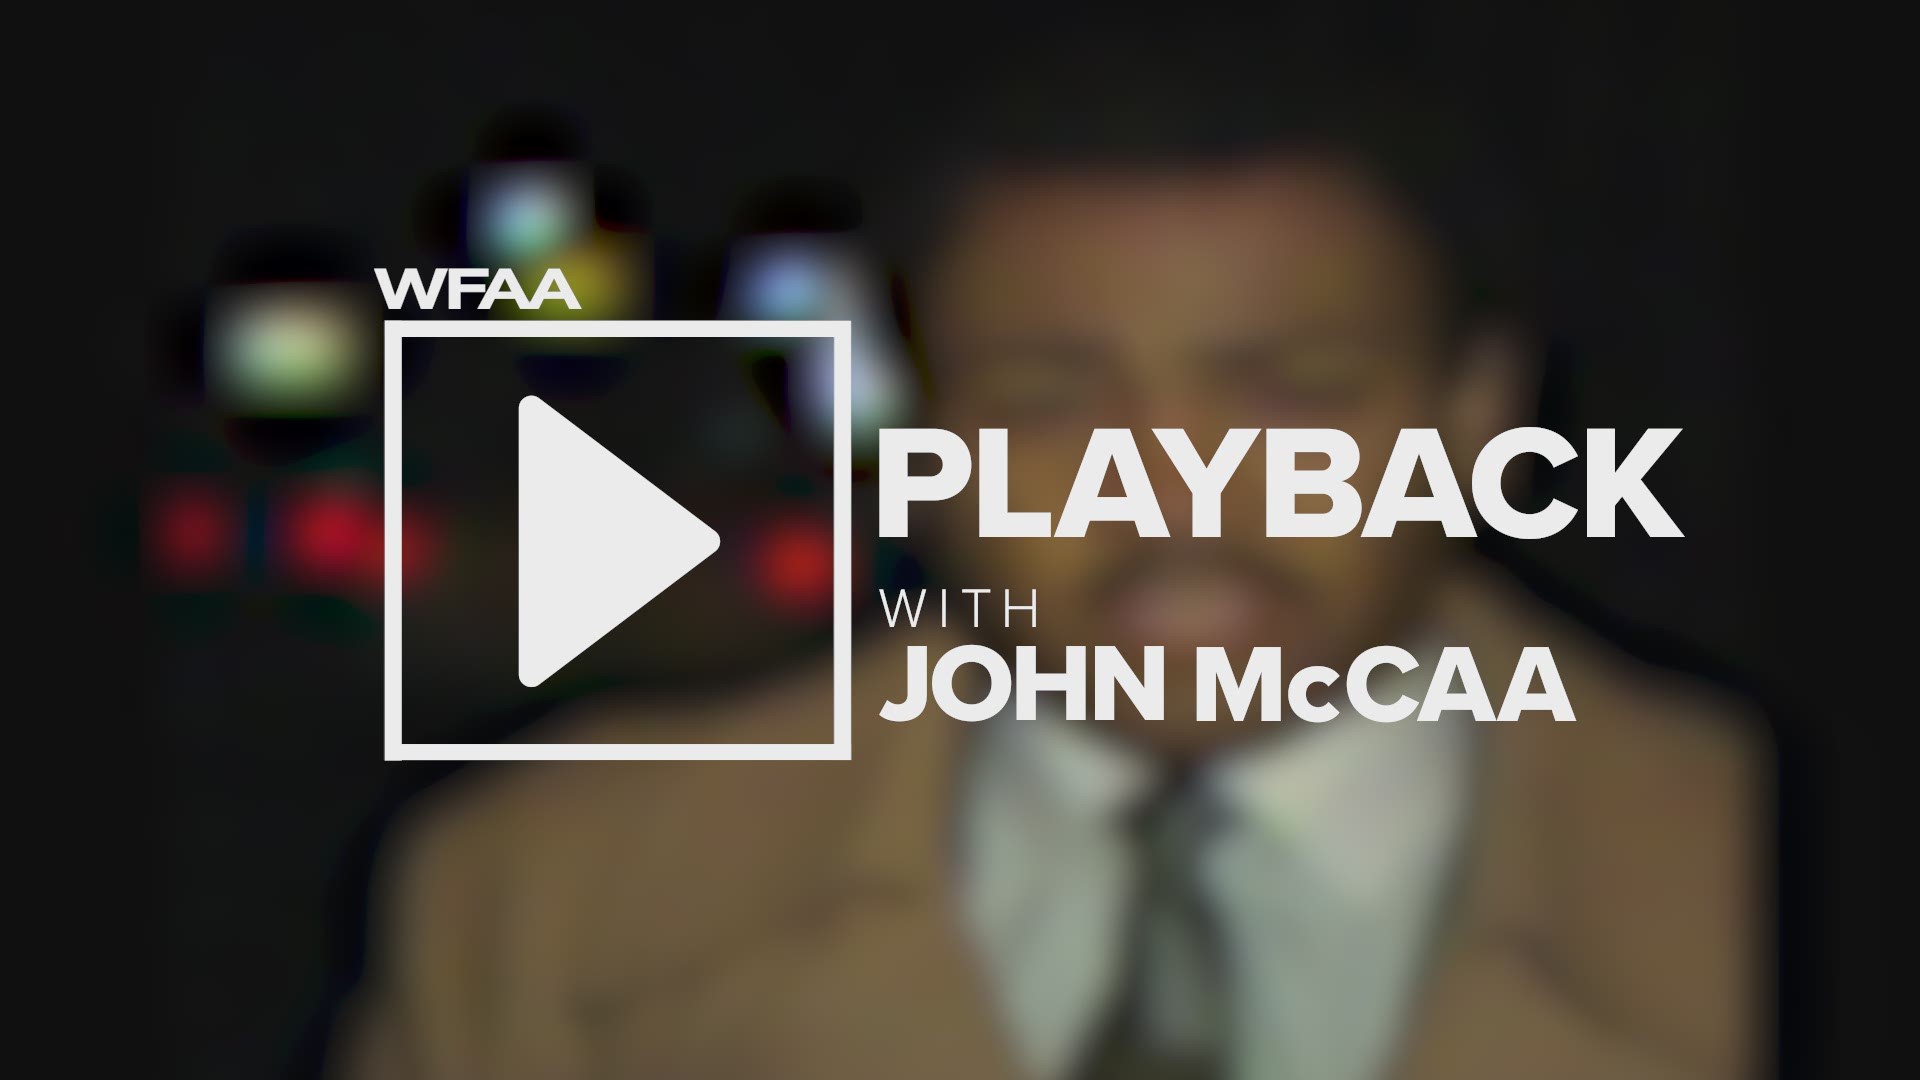 Just before his final sign-off, longtime WFAA anchor John McCaa dishes on the resume he sent to WFAA in 1984.